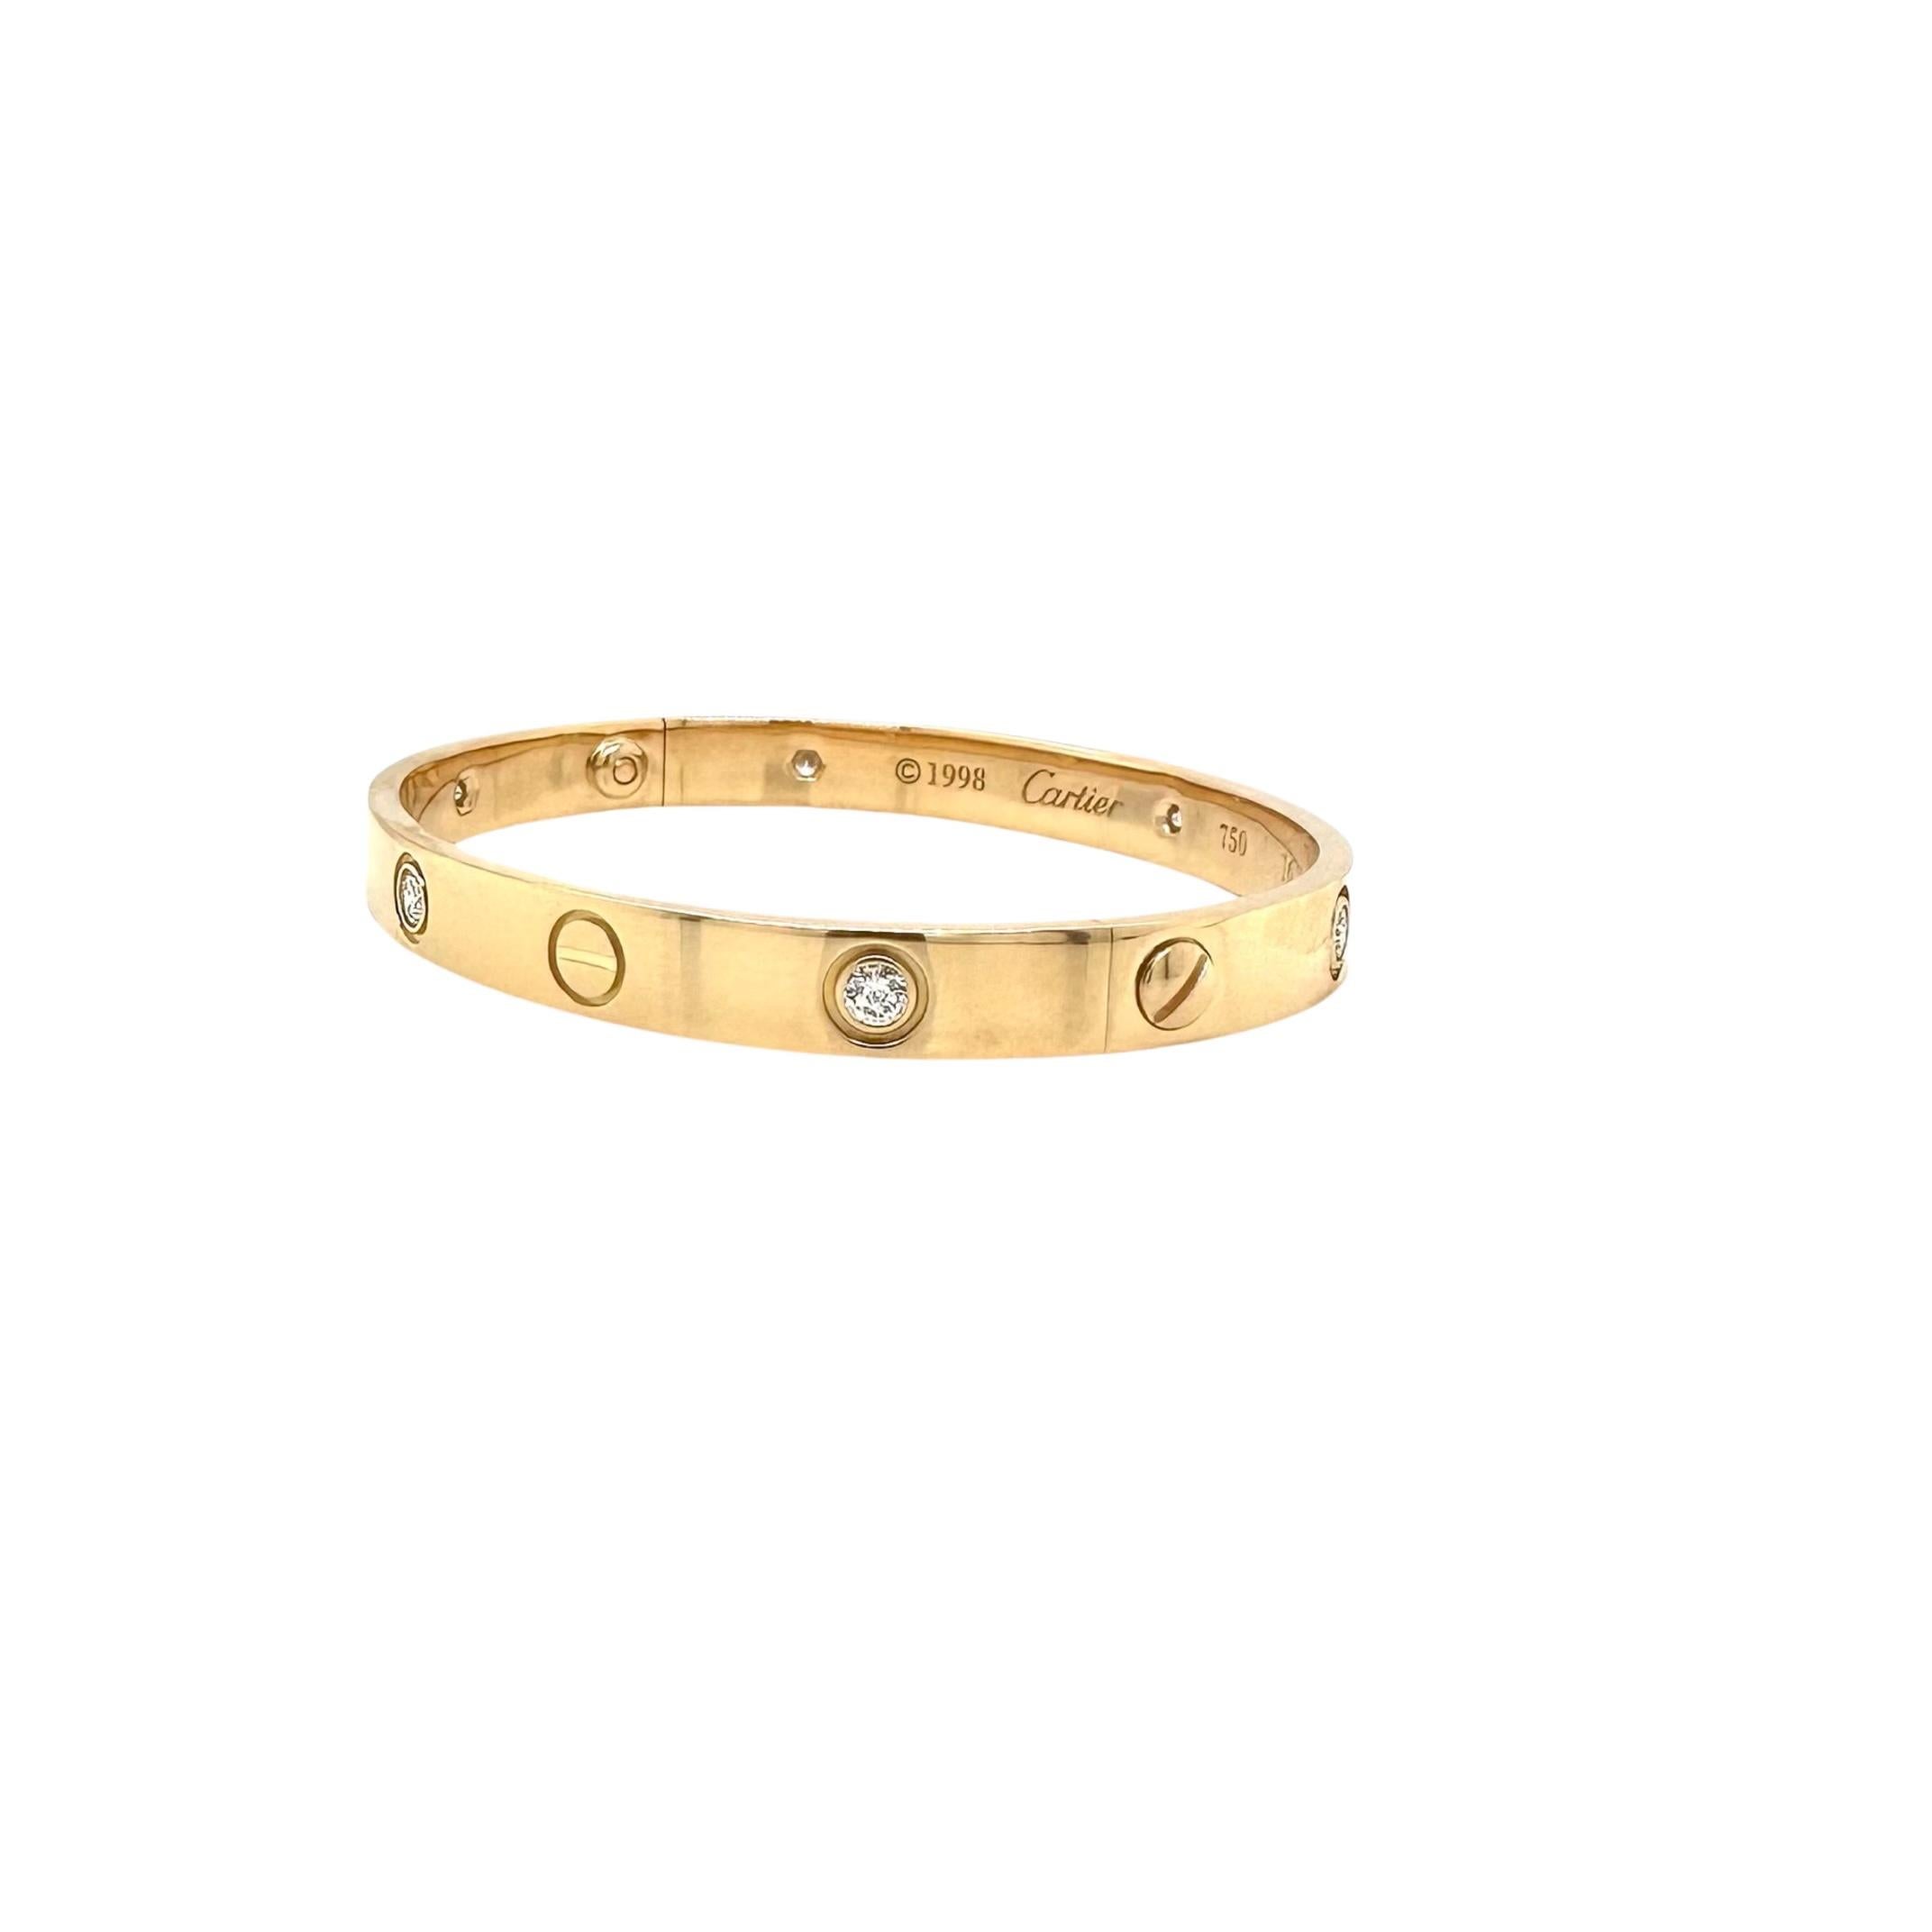 Designer: Cartier
Collection:  Love
Style: Bangle
Metal: Yellow Gold 
Metal Purity: 18K 
Stones: 6 Round Brilliant Cut Diamonds
Screw Style System: Old screw system (screws come off)
Bracelet Size: 16 = 16 cm
Hallmarks: Cartier; Serial #, 750,